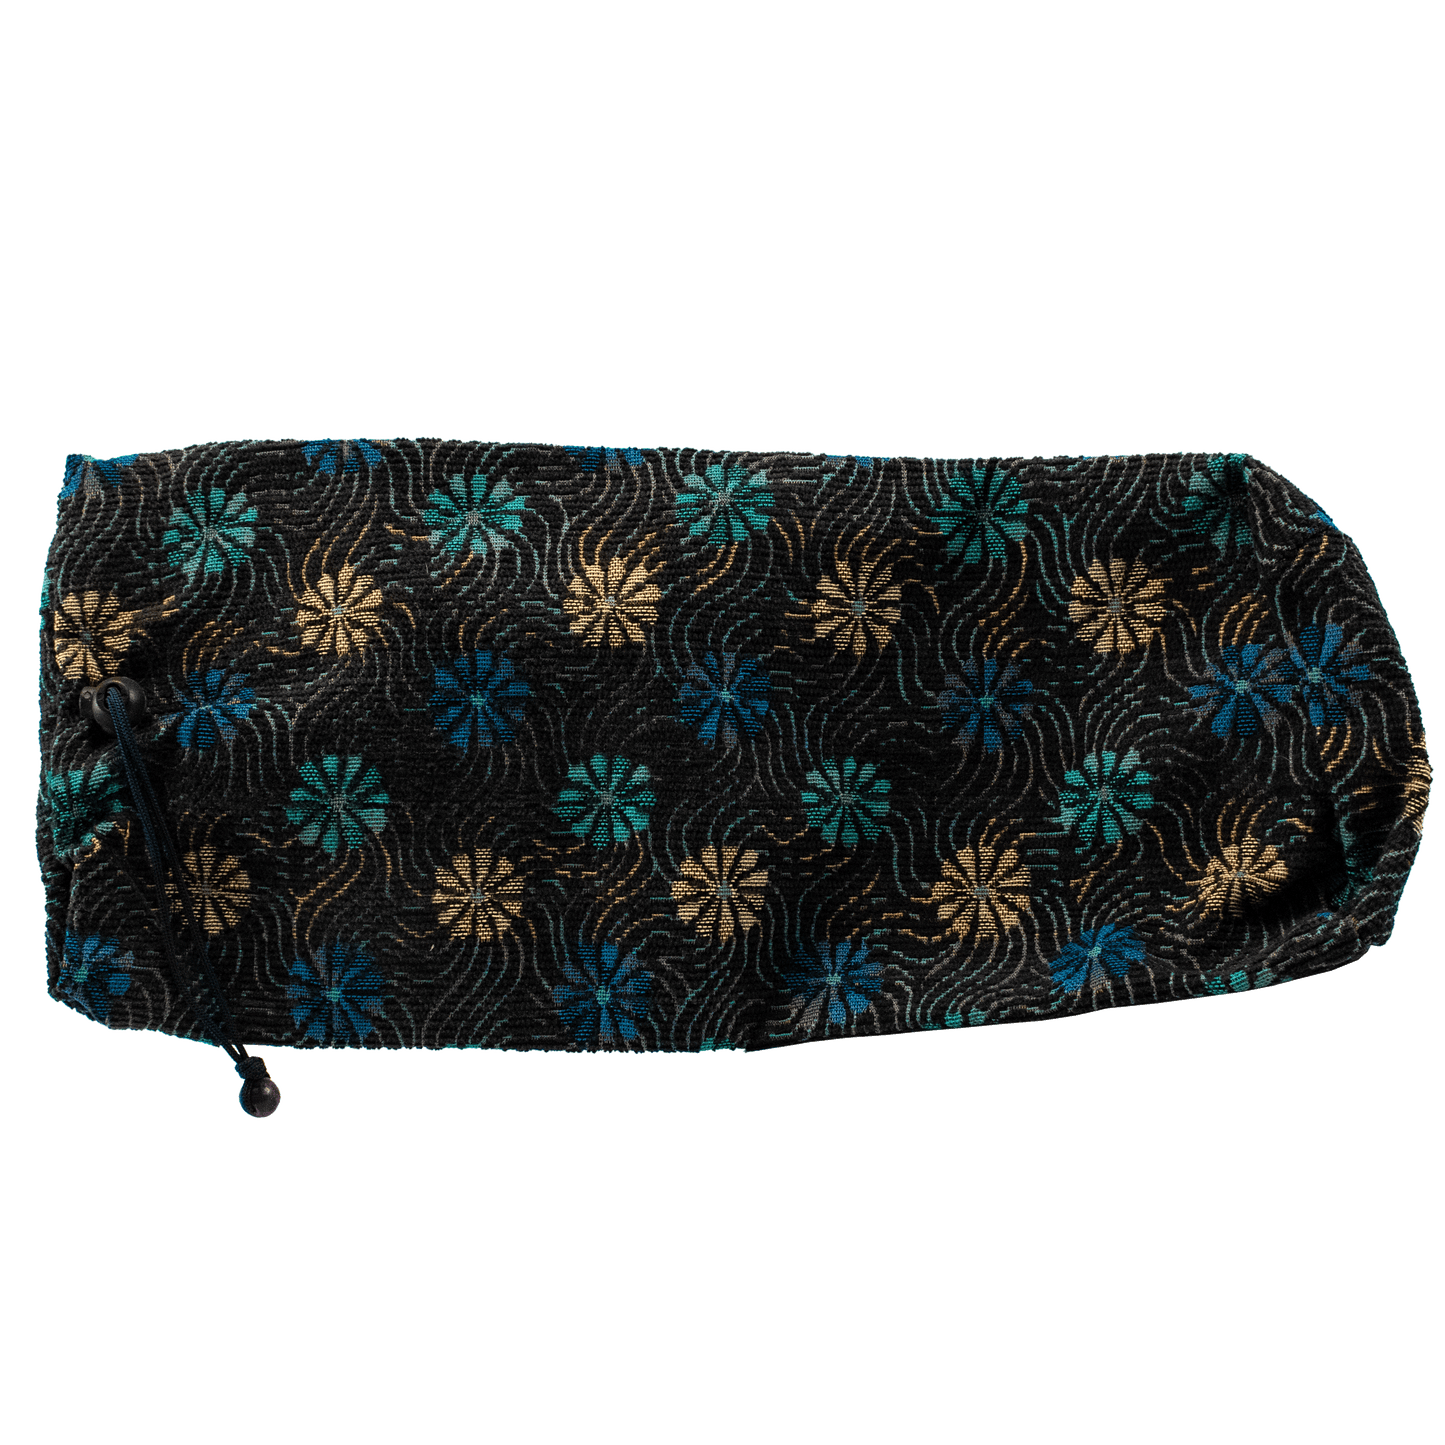 Navy Shofar Bag 17 inches. with light yellow and blue hues of whimsical daisy pattern